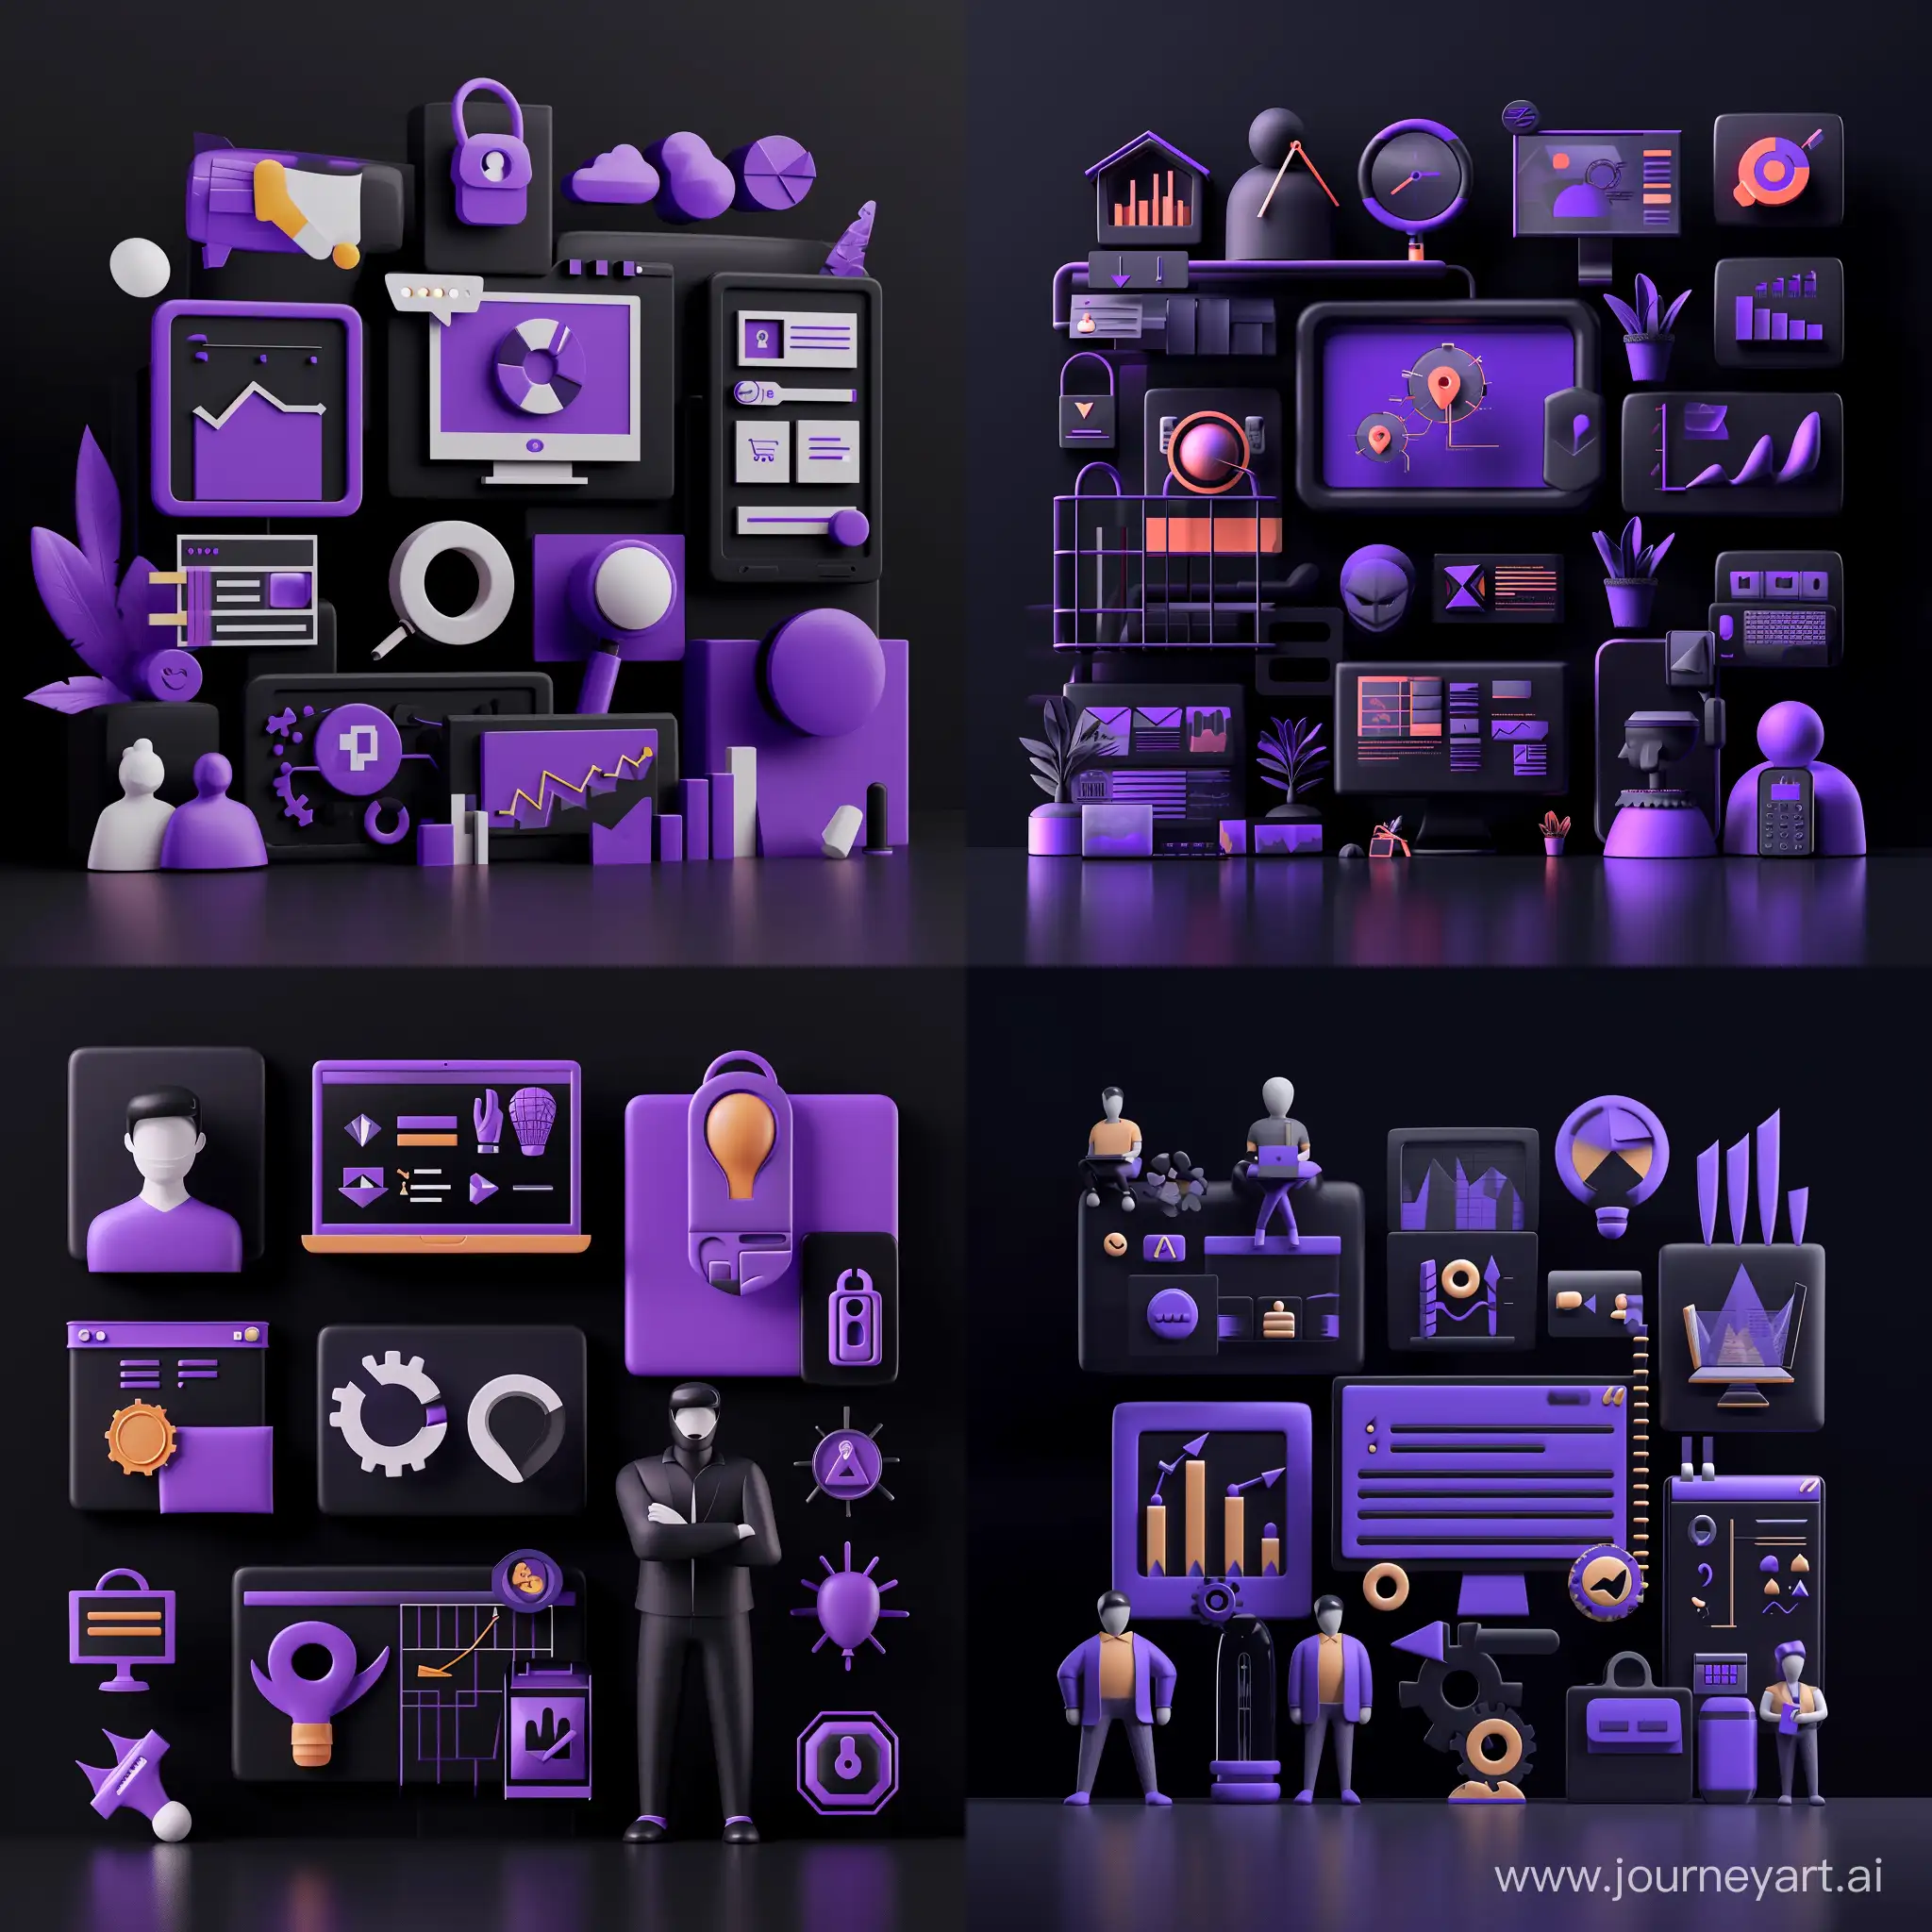 3d rendering of web agency products like seo optimization , adverting , security analyze , web design , and etc. in a black background with purple color set , and don't use unclear images or shape for humans, use clear and real shape or icons